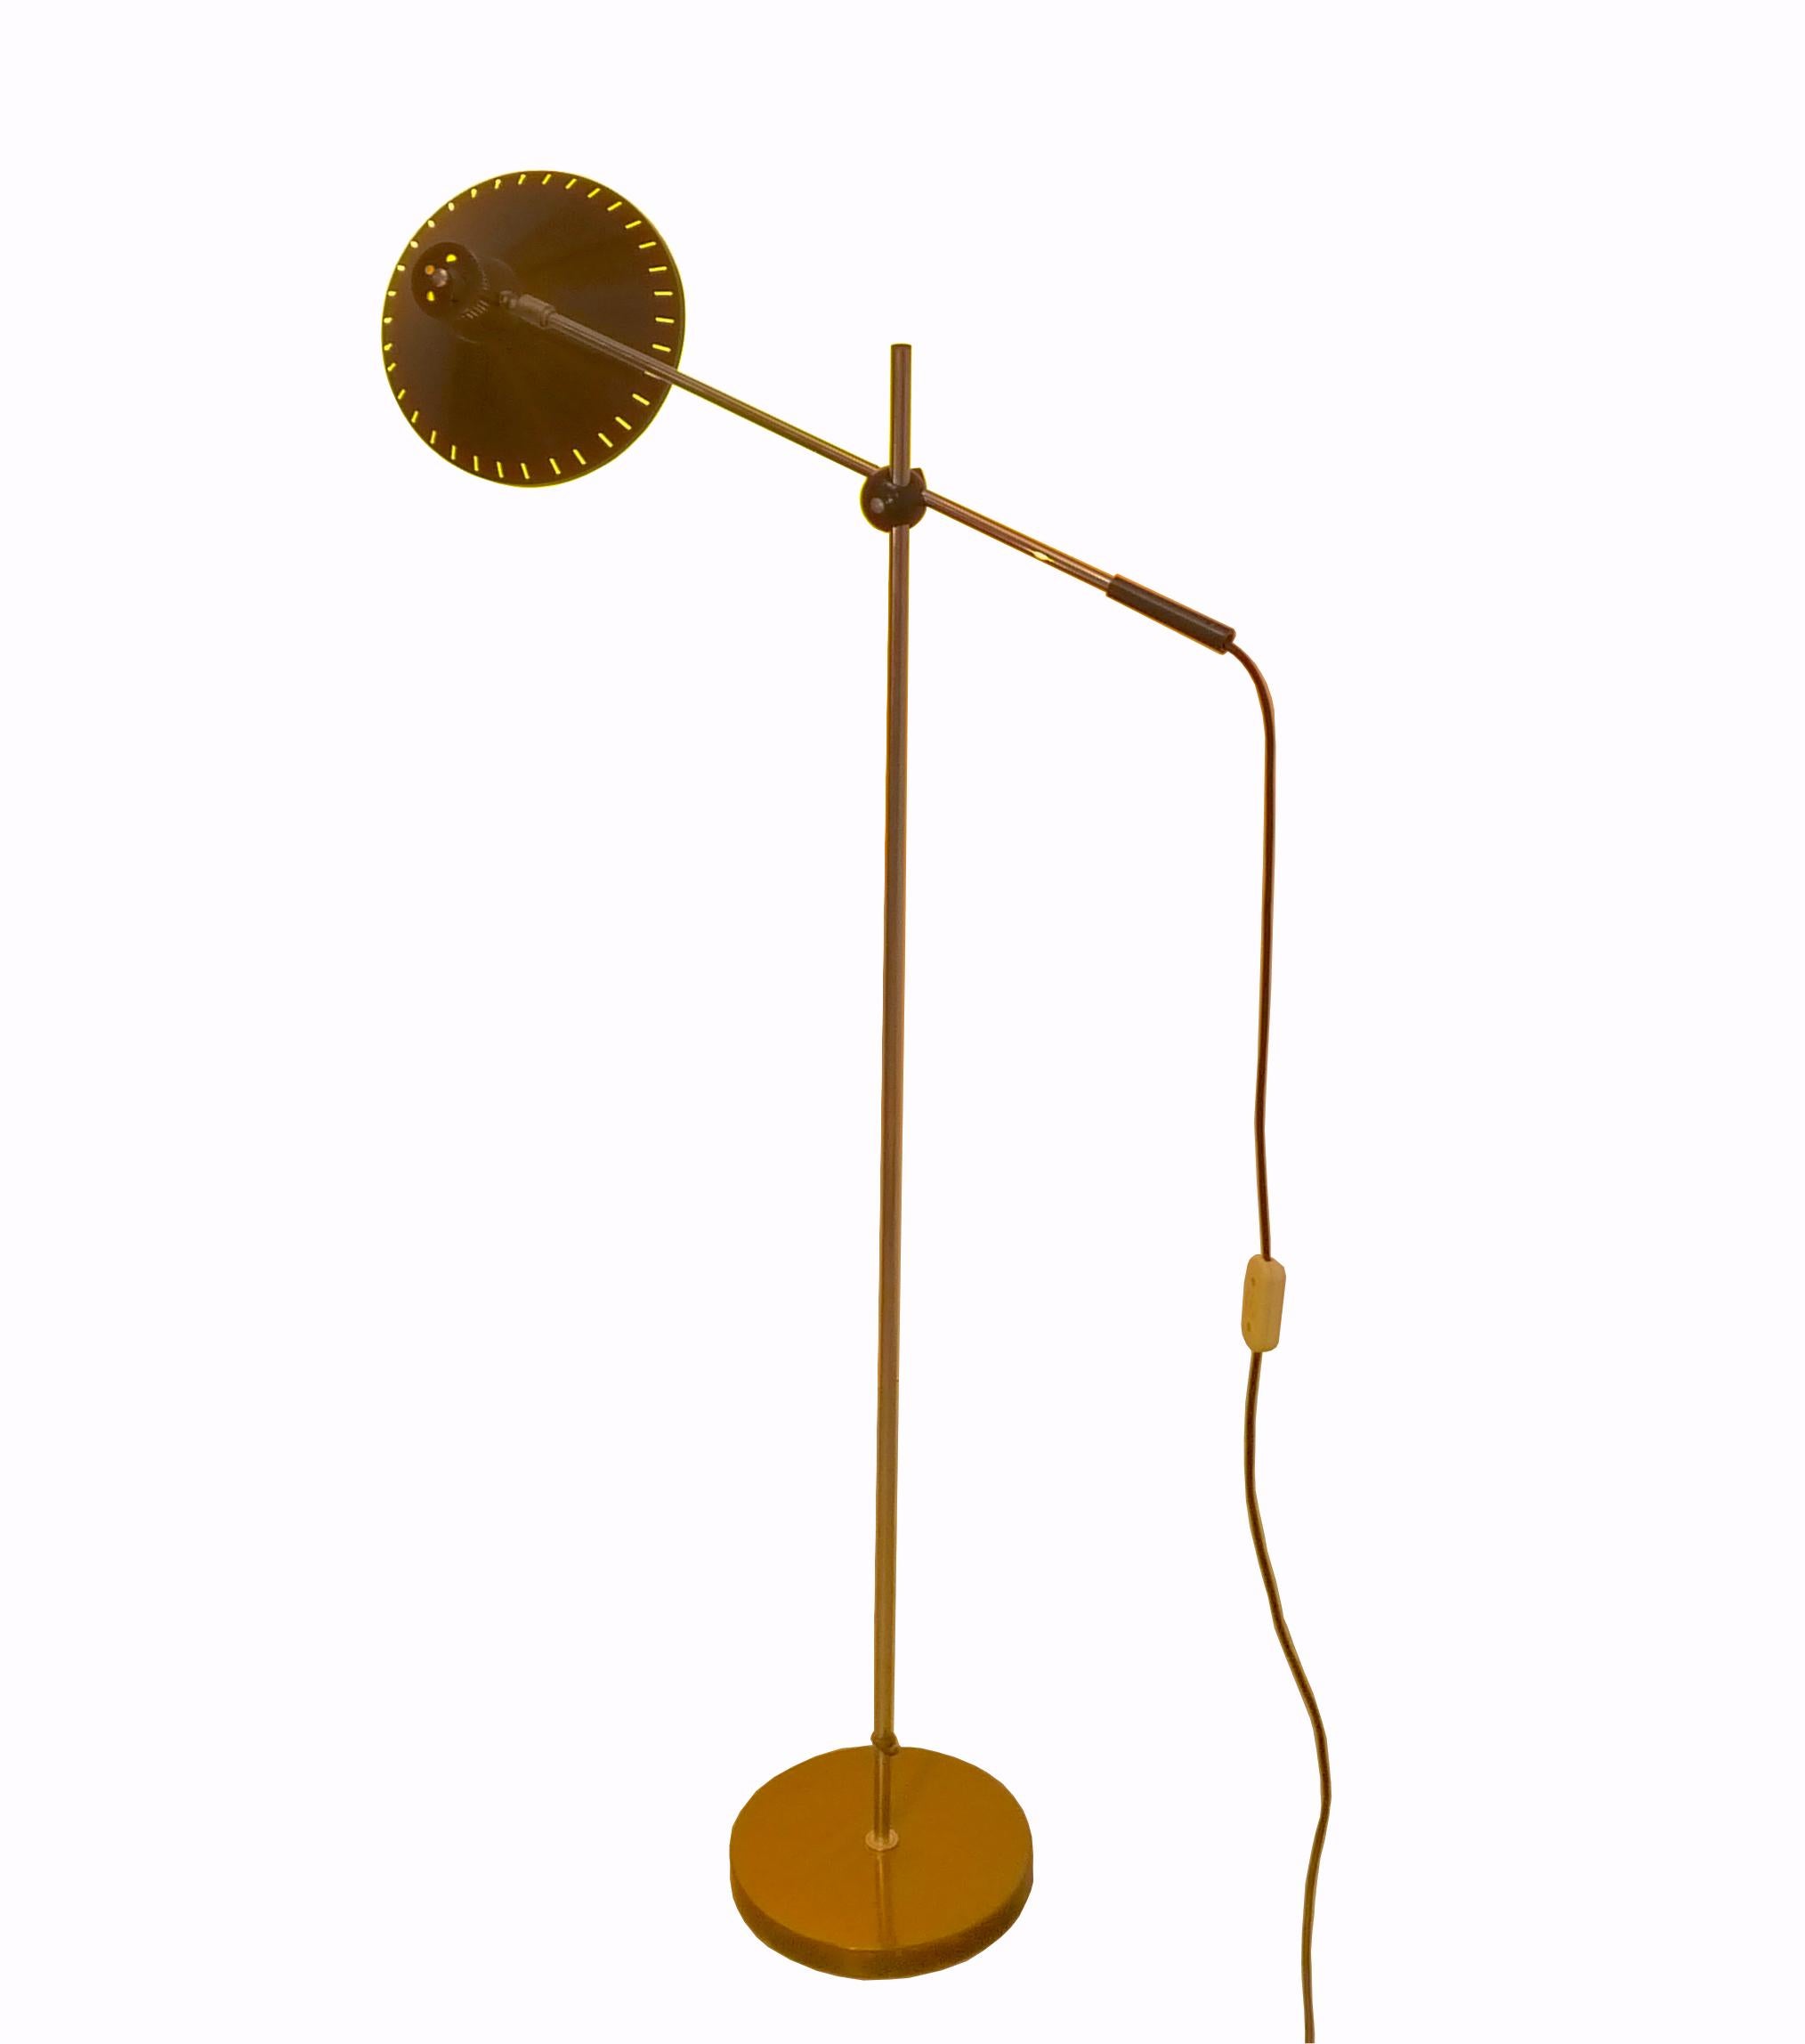 Adjustable Anvia floor lamp designed by J. Hoogervorst in ca.1960. This aluminum lamp is fully adjustable and suitable for direct light to read or indirect light on the wall or ceiling. Considering its age this vintage floor lamp is in good and